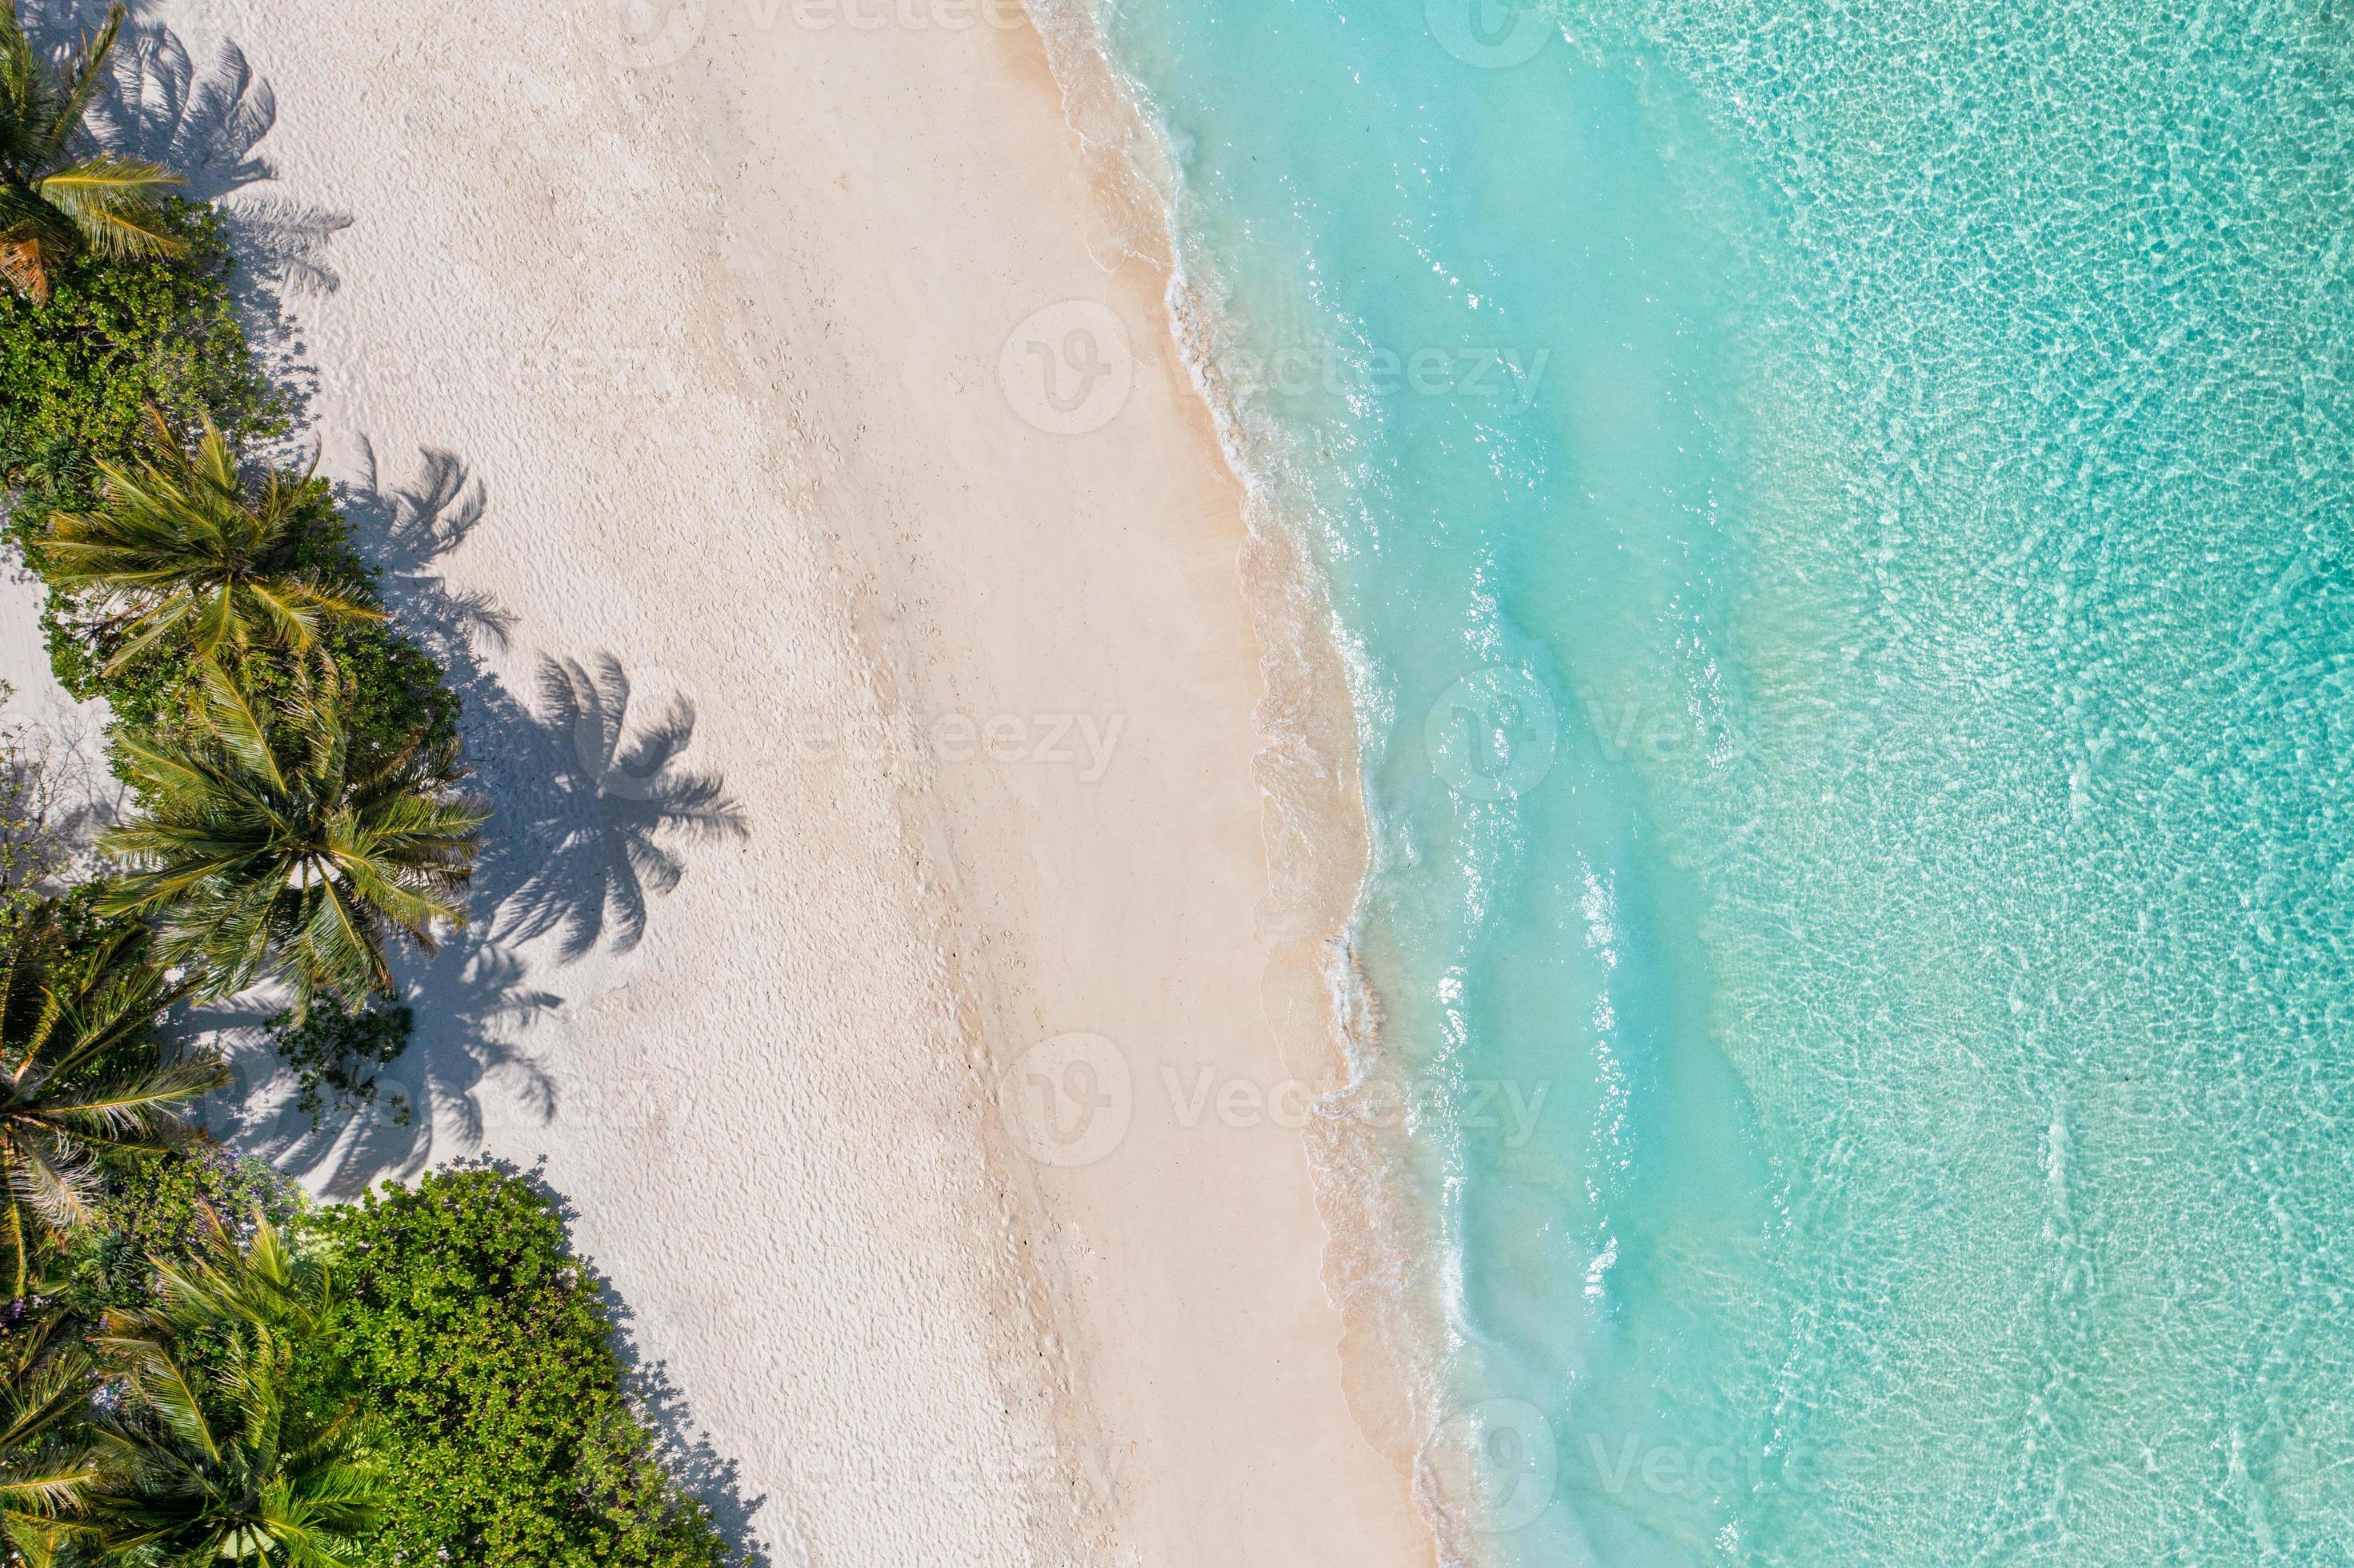 Aerial top view on sand beach. Tropical beach with white sand turquoise sea, palm trees under sunlight. Drone view, luxury travel destination vacation landscape. Amazing nature island 13089094 Stock Photo